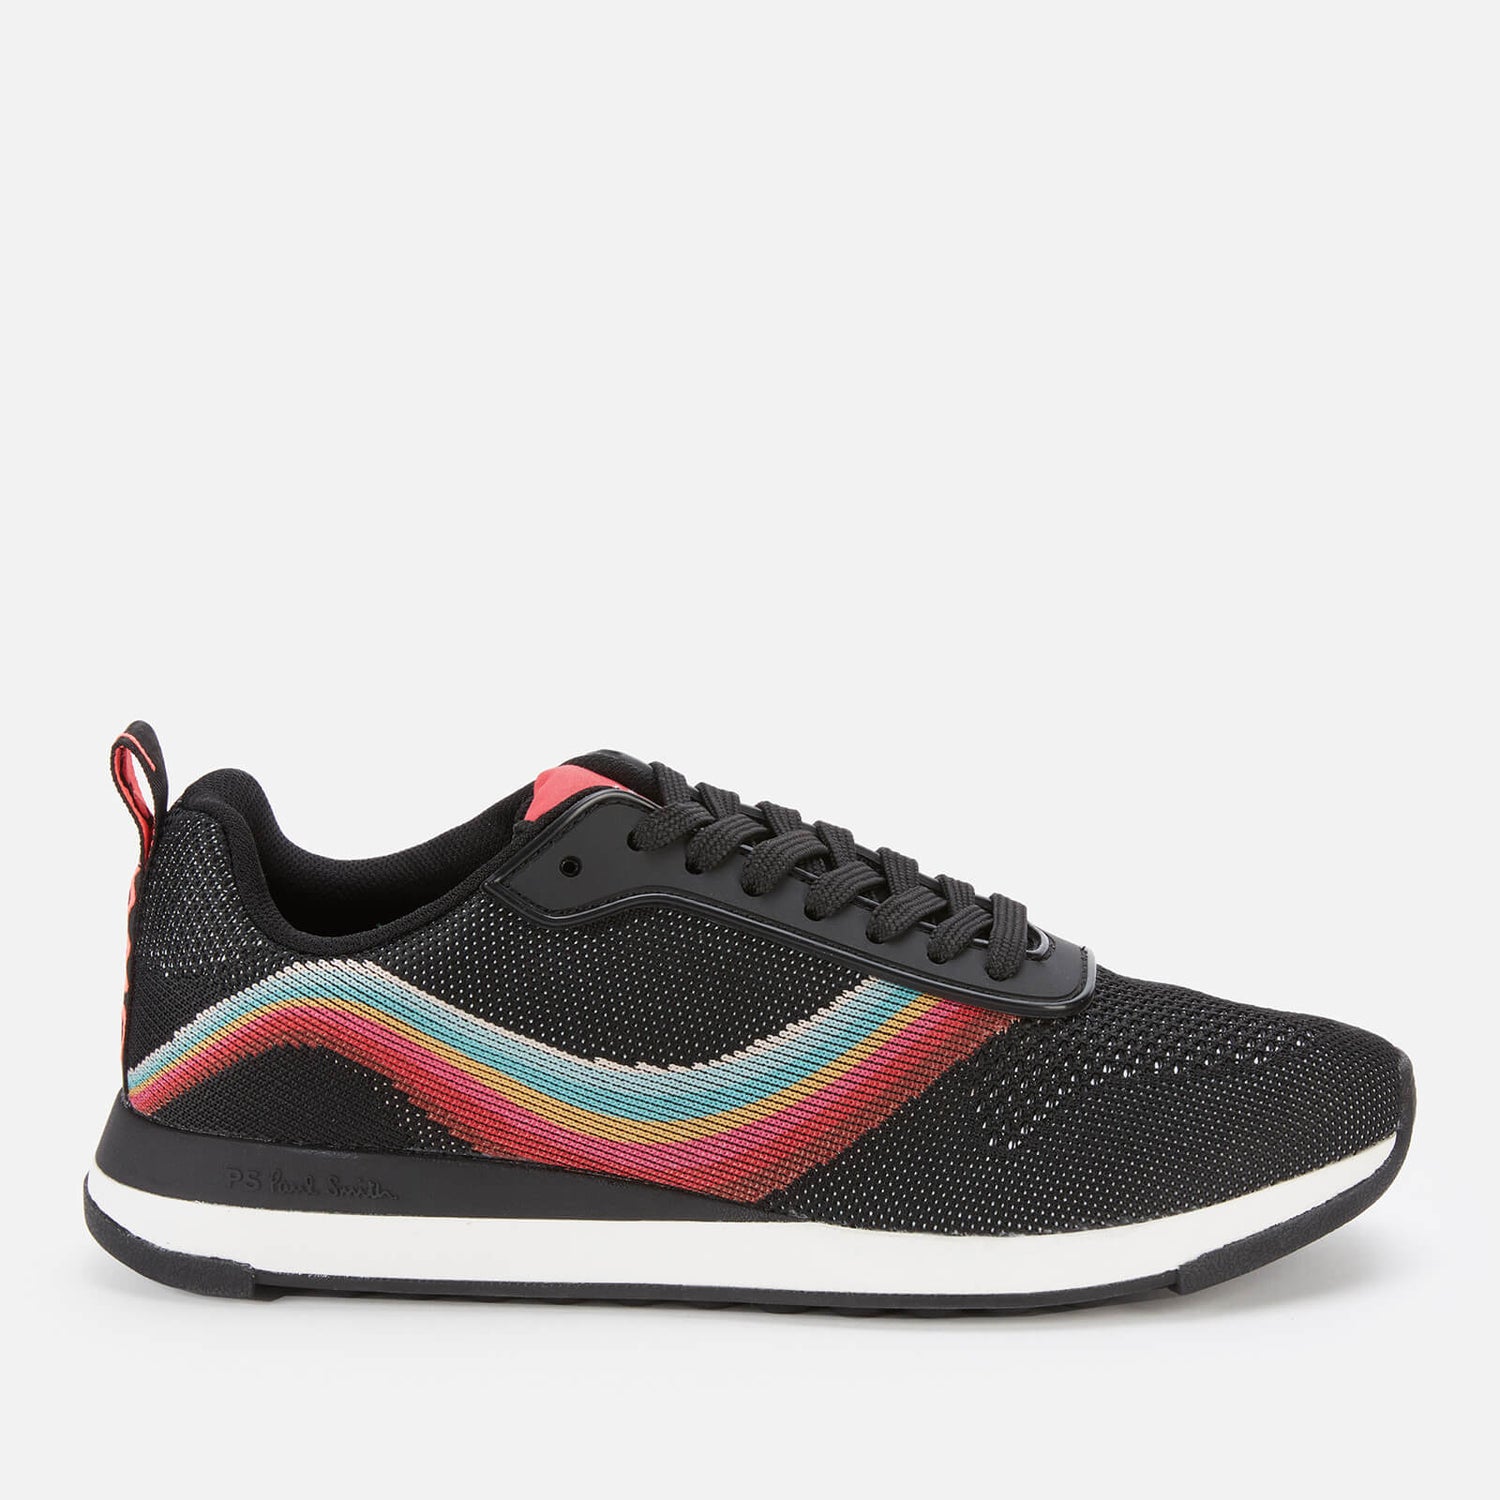 Paul Smith Women's Rappid Mesh Running Style Trainers - Black